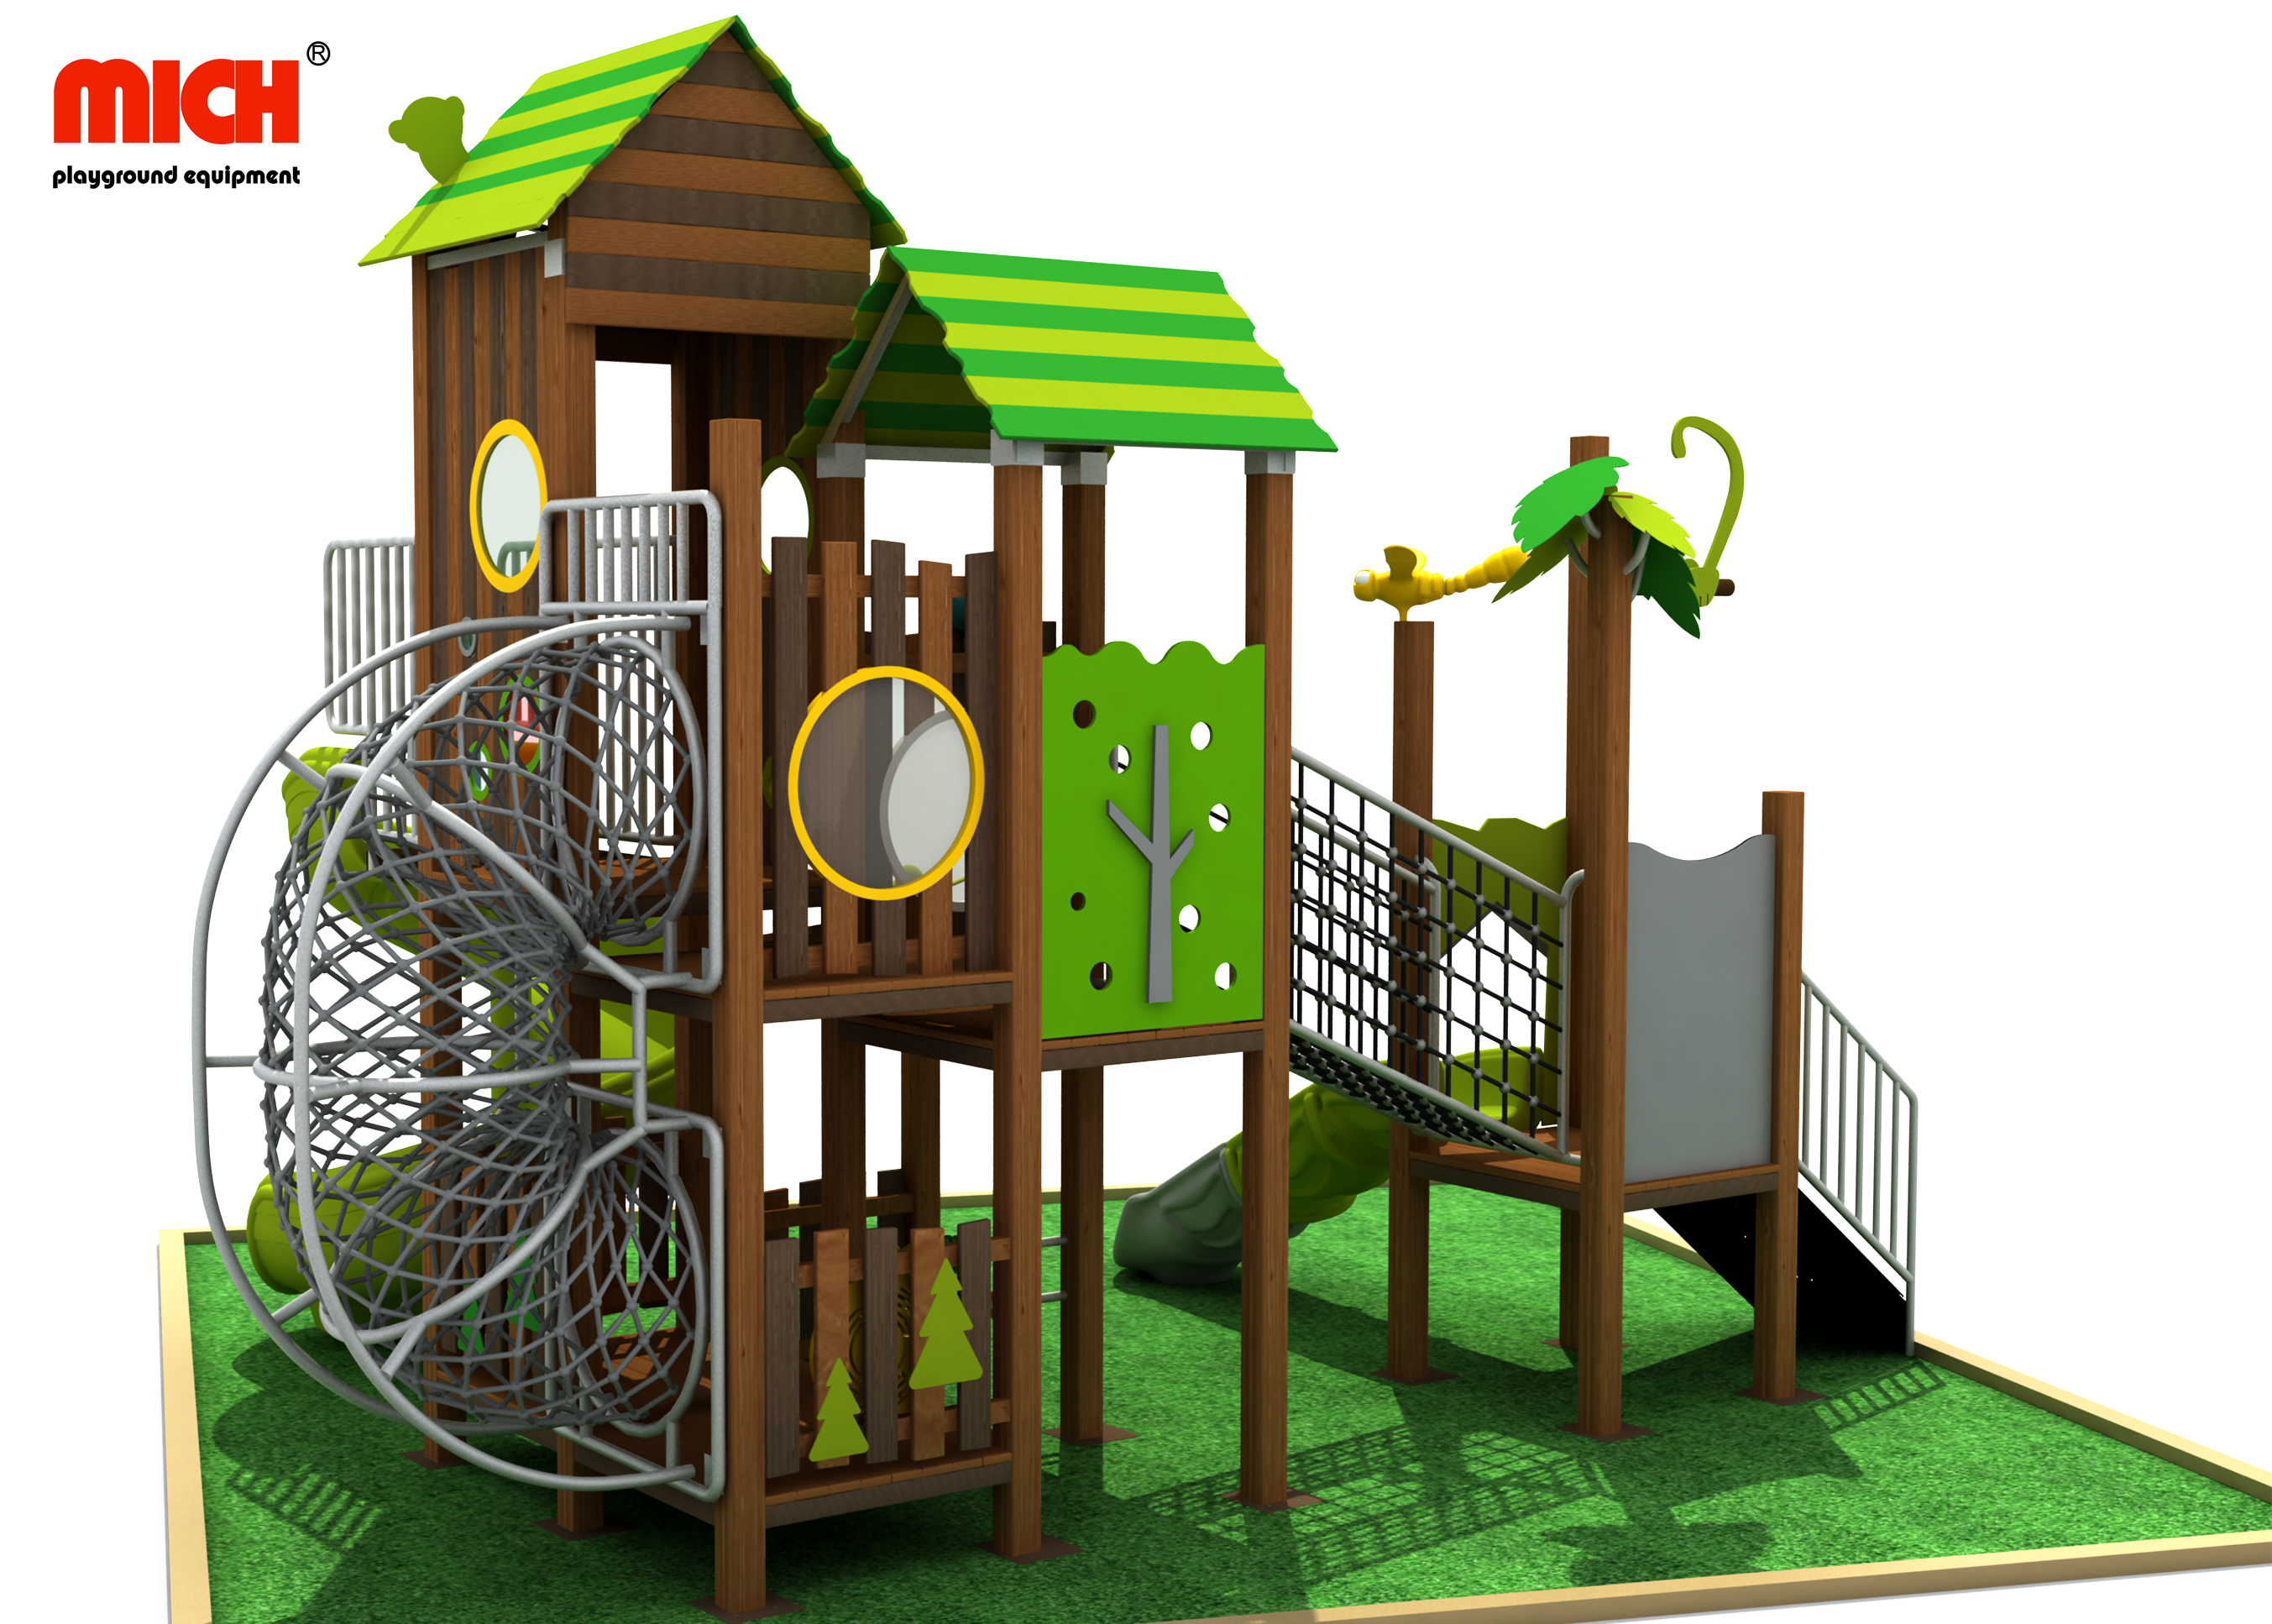 Série WPC Public Areat Kids Outdoor Playground